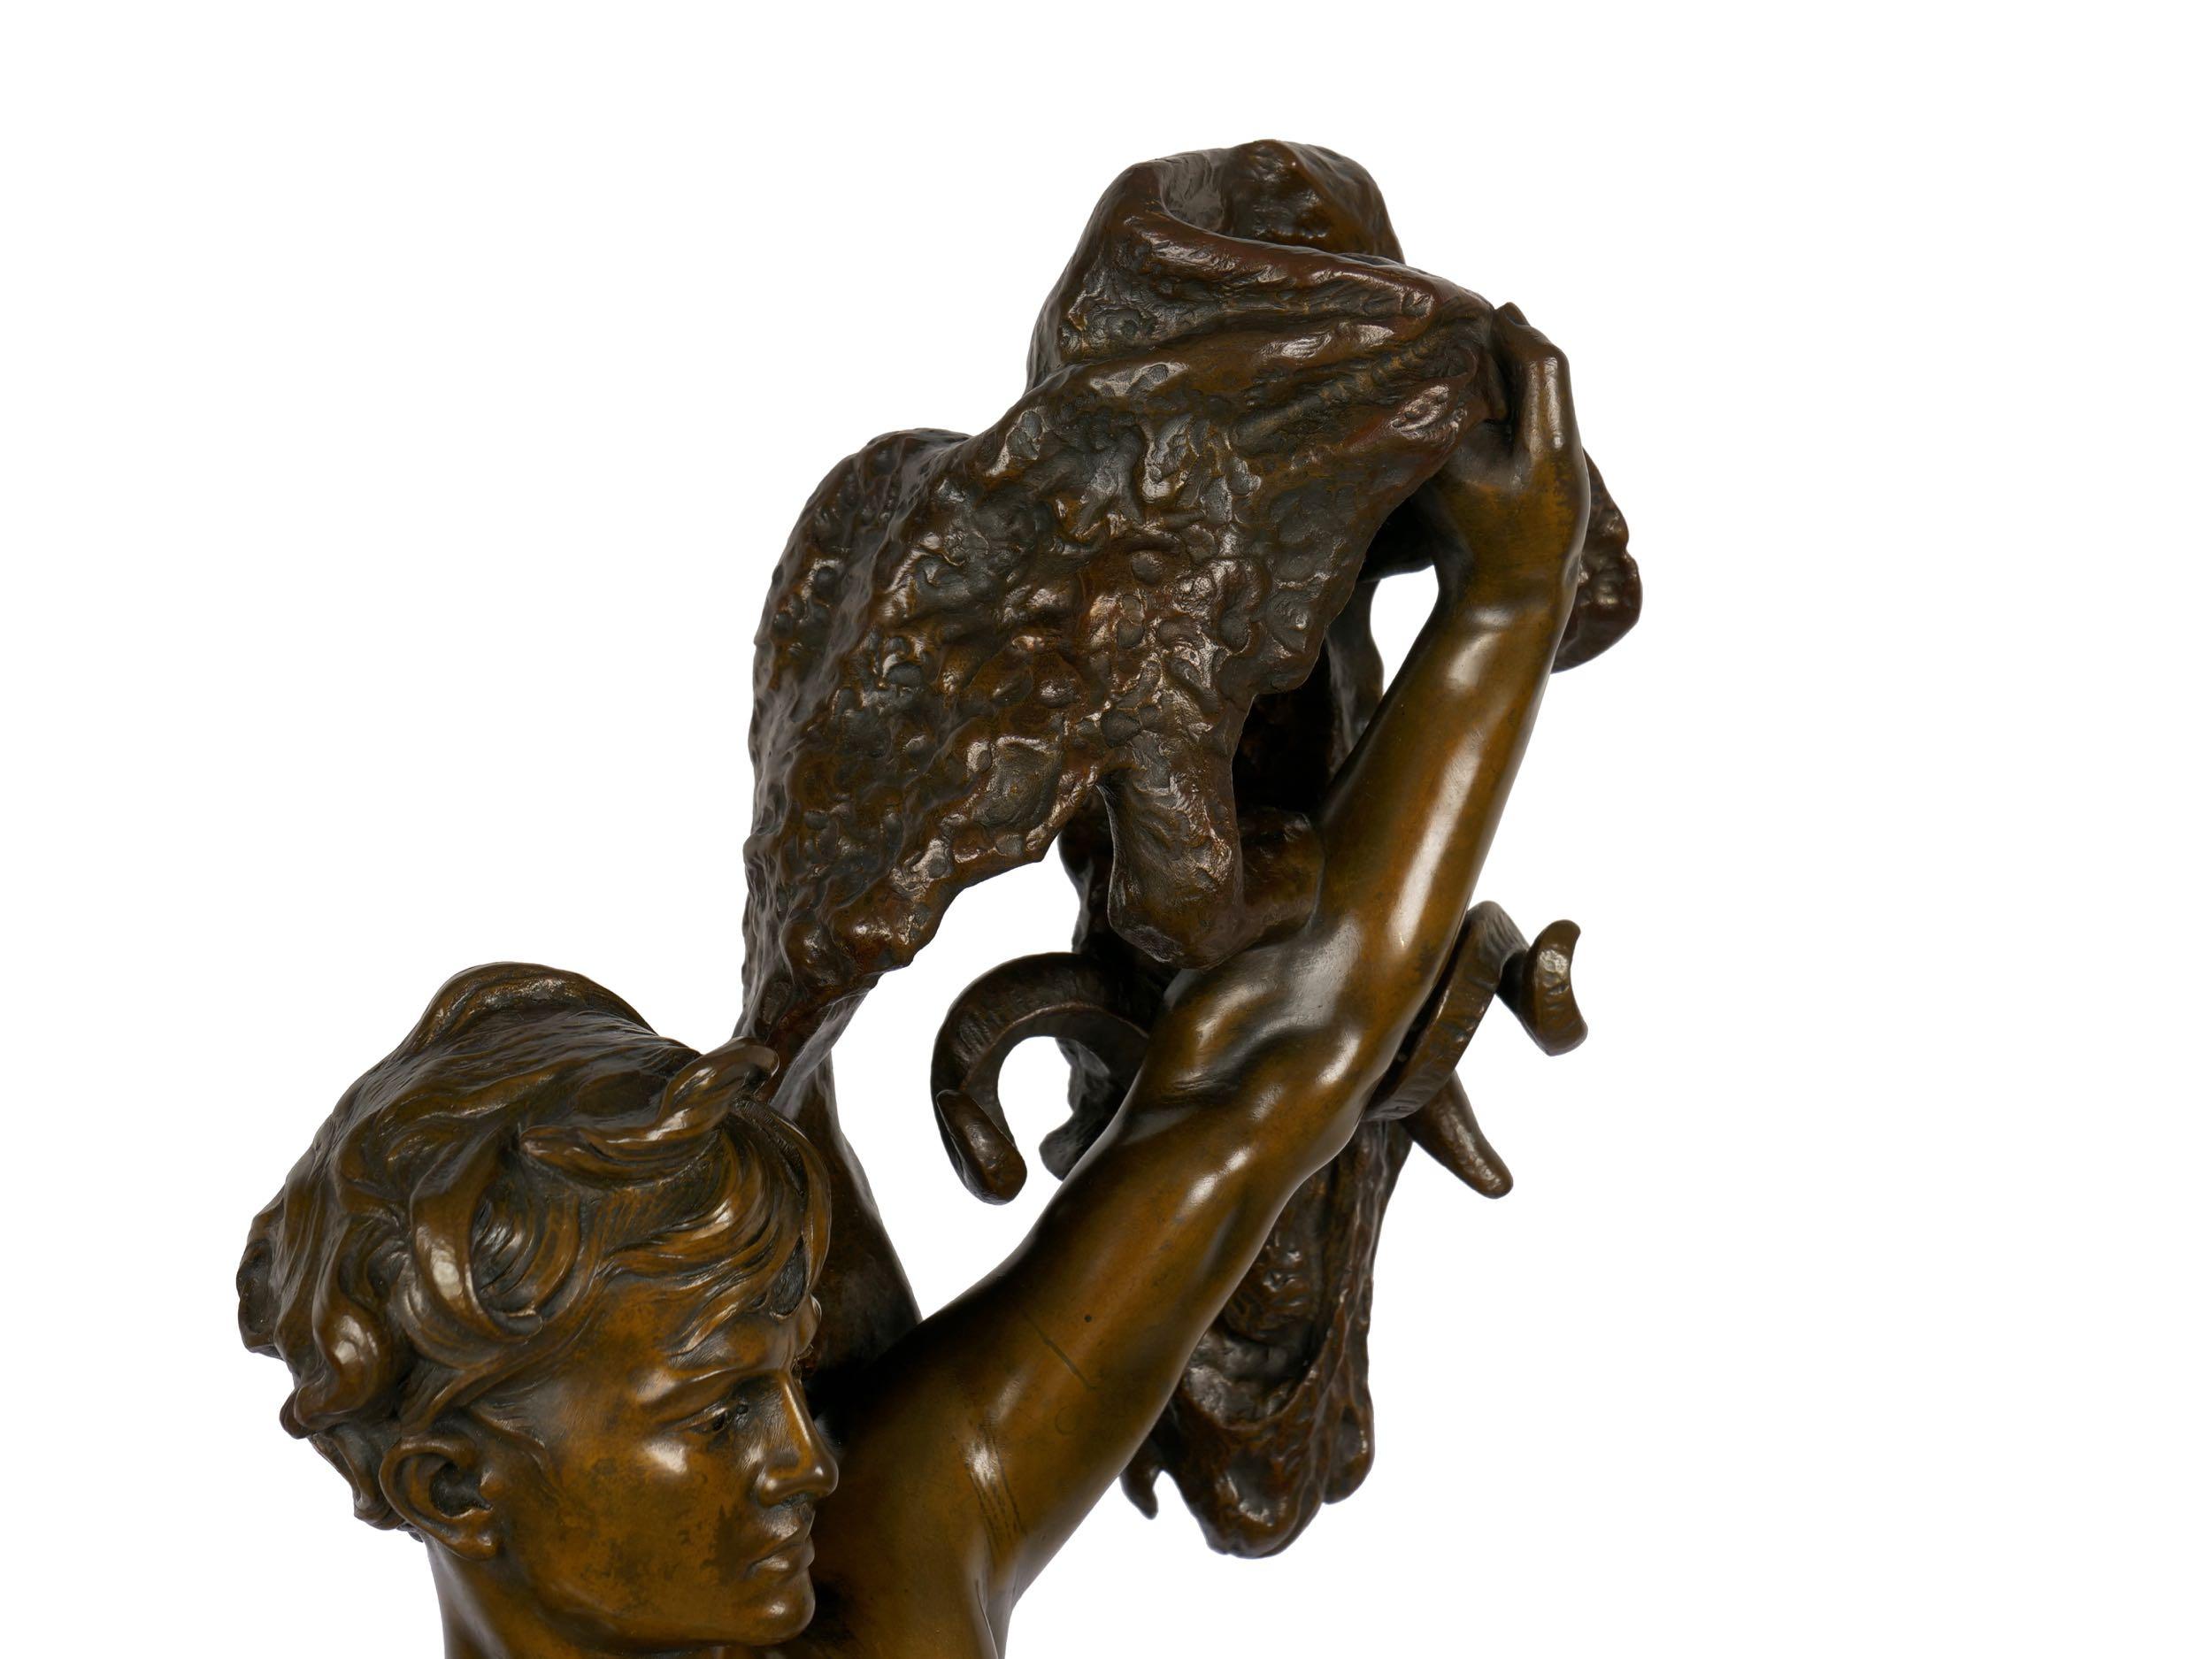 “Jason and the Golden Fleece” '1875' French Bronze Sculpture by Lanson & Susse 14